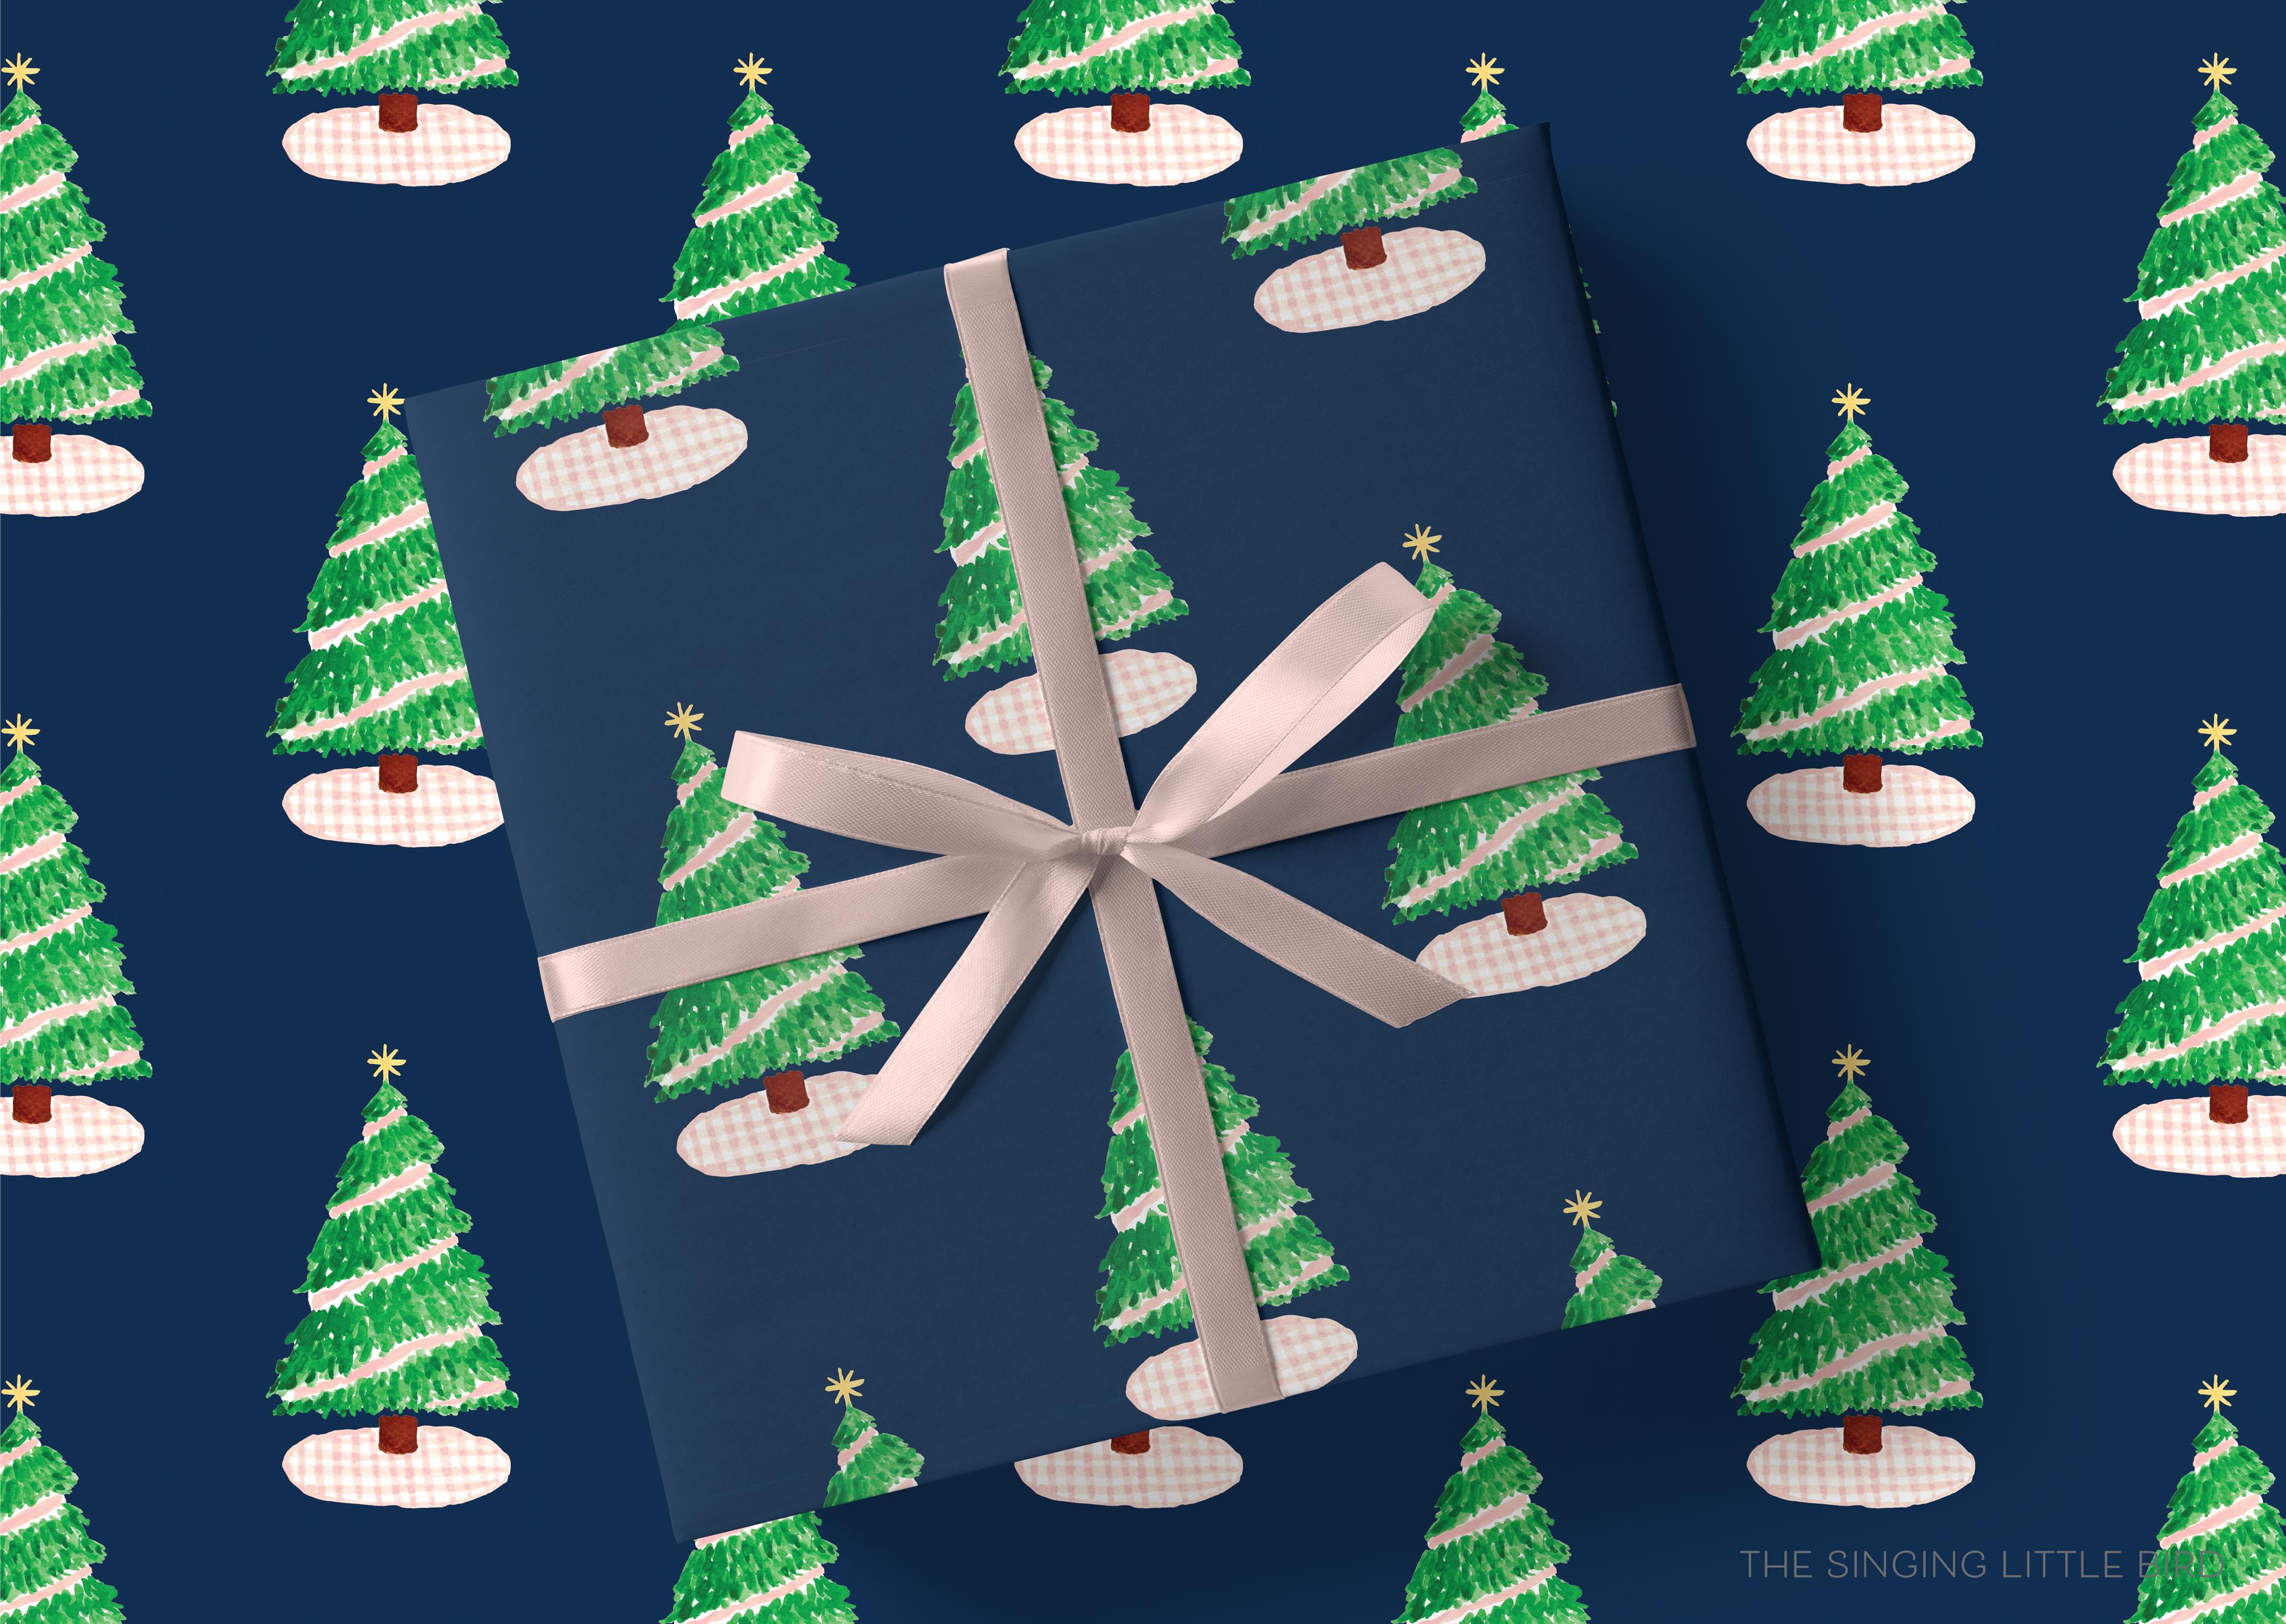 Navy Pink Gingham Christmas Tree Gift Wrap-This matte finish gift wrap features our hand-painted topiaries in ginger jars. It makes a perfect wrapping paper for a holiday present. -The Singing Little Bird